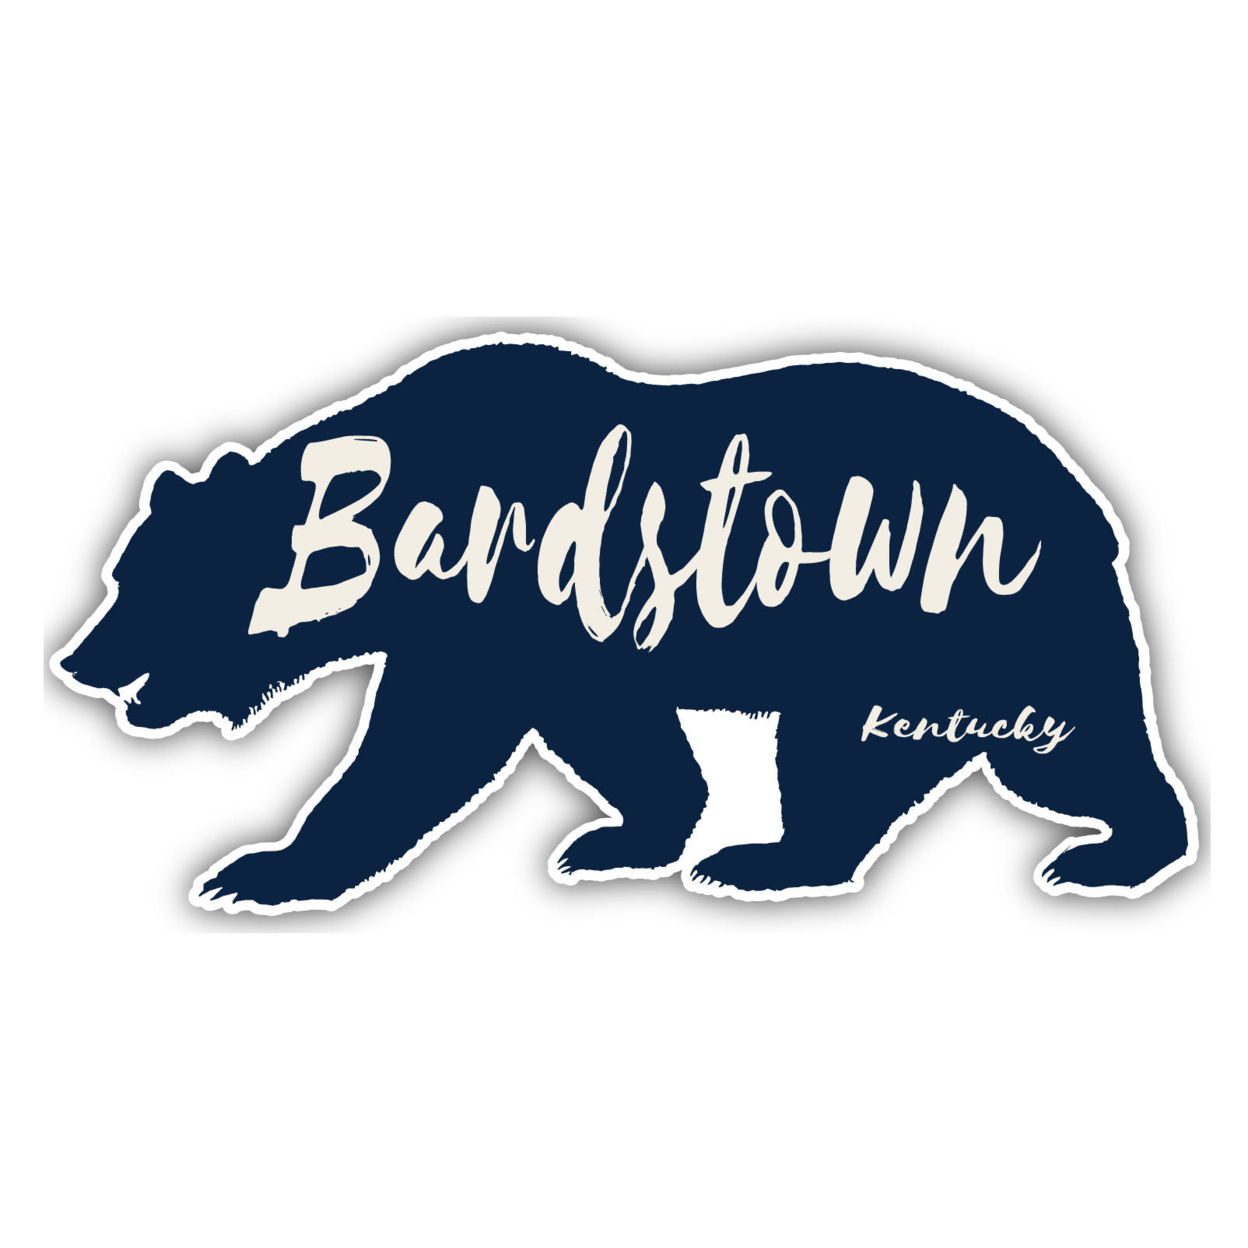 Bardstown Kentucky Souvenir Decorative Stickers (Choose Theme And Size) - 4-Pack, 2-Inch, Bear